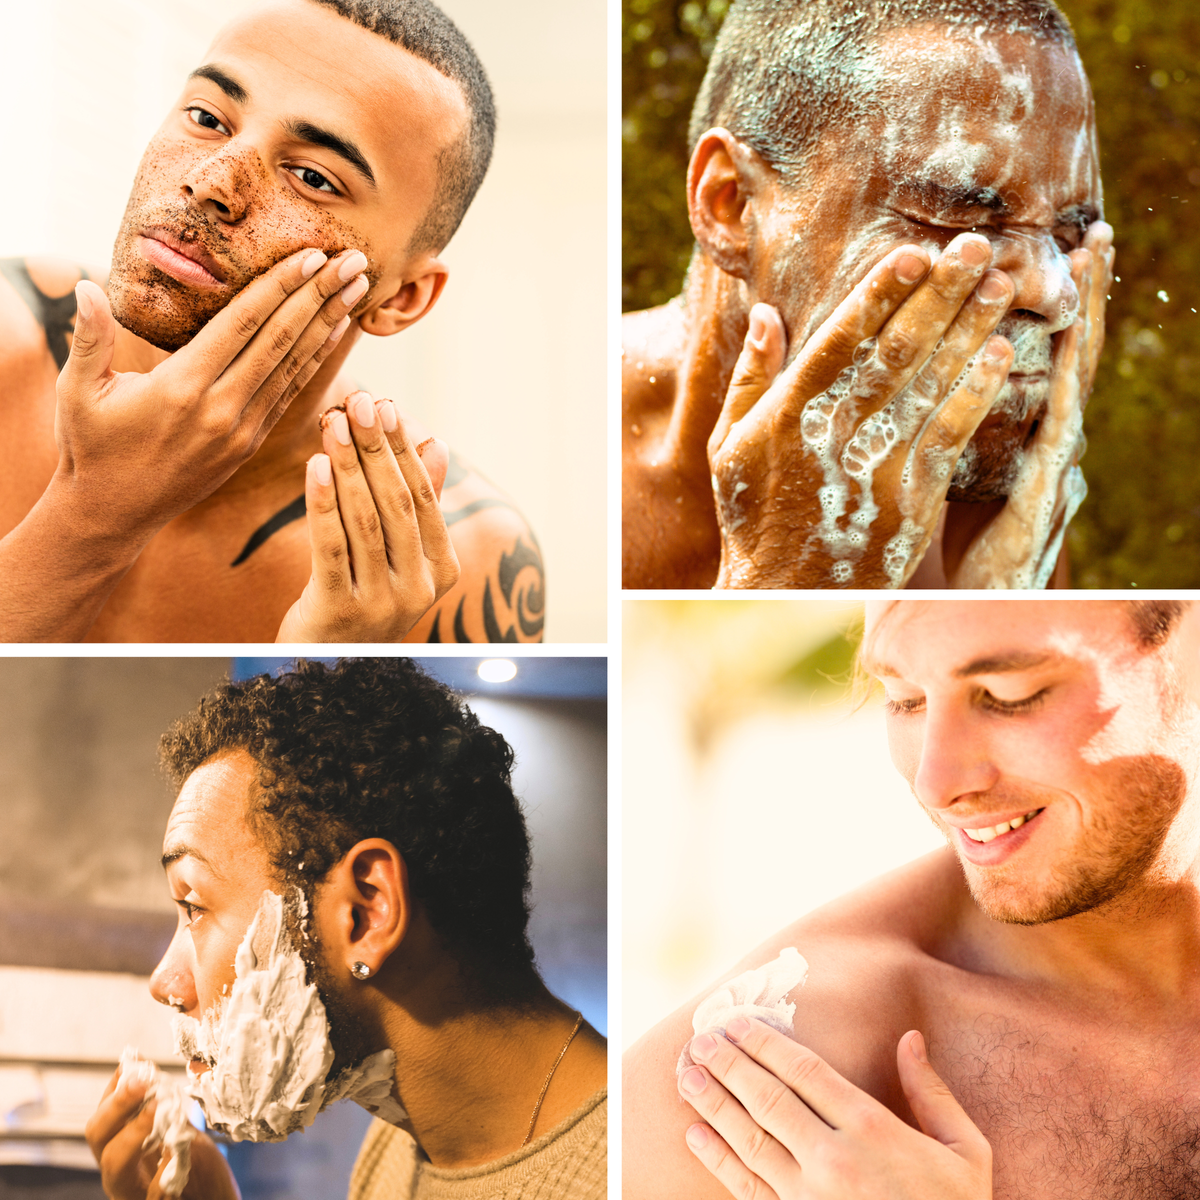 Men in different stages of facial skin care, washing shaving exfoliating sunblock